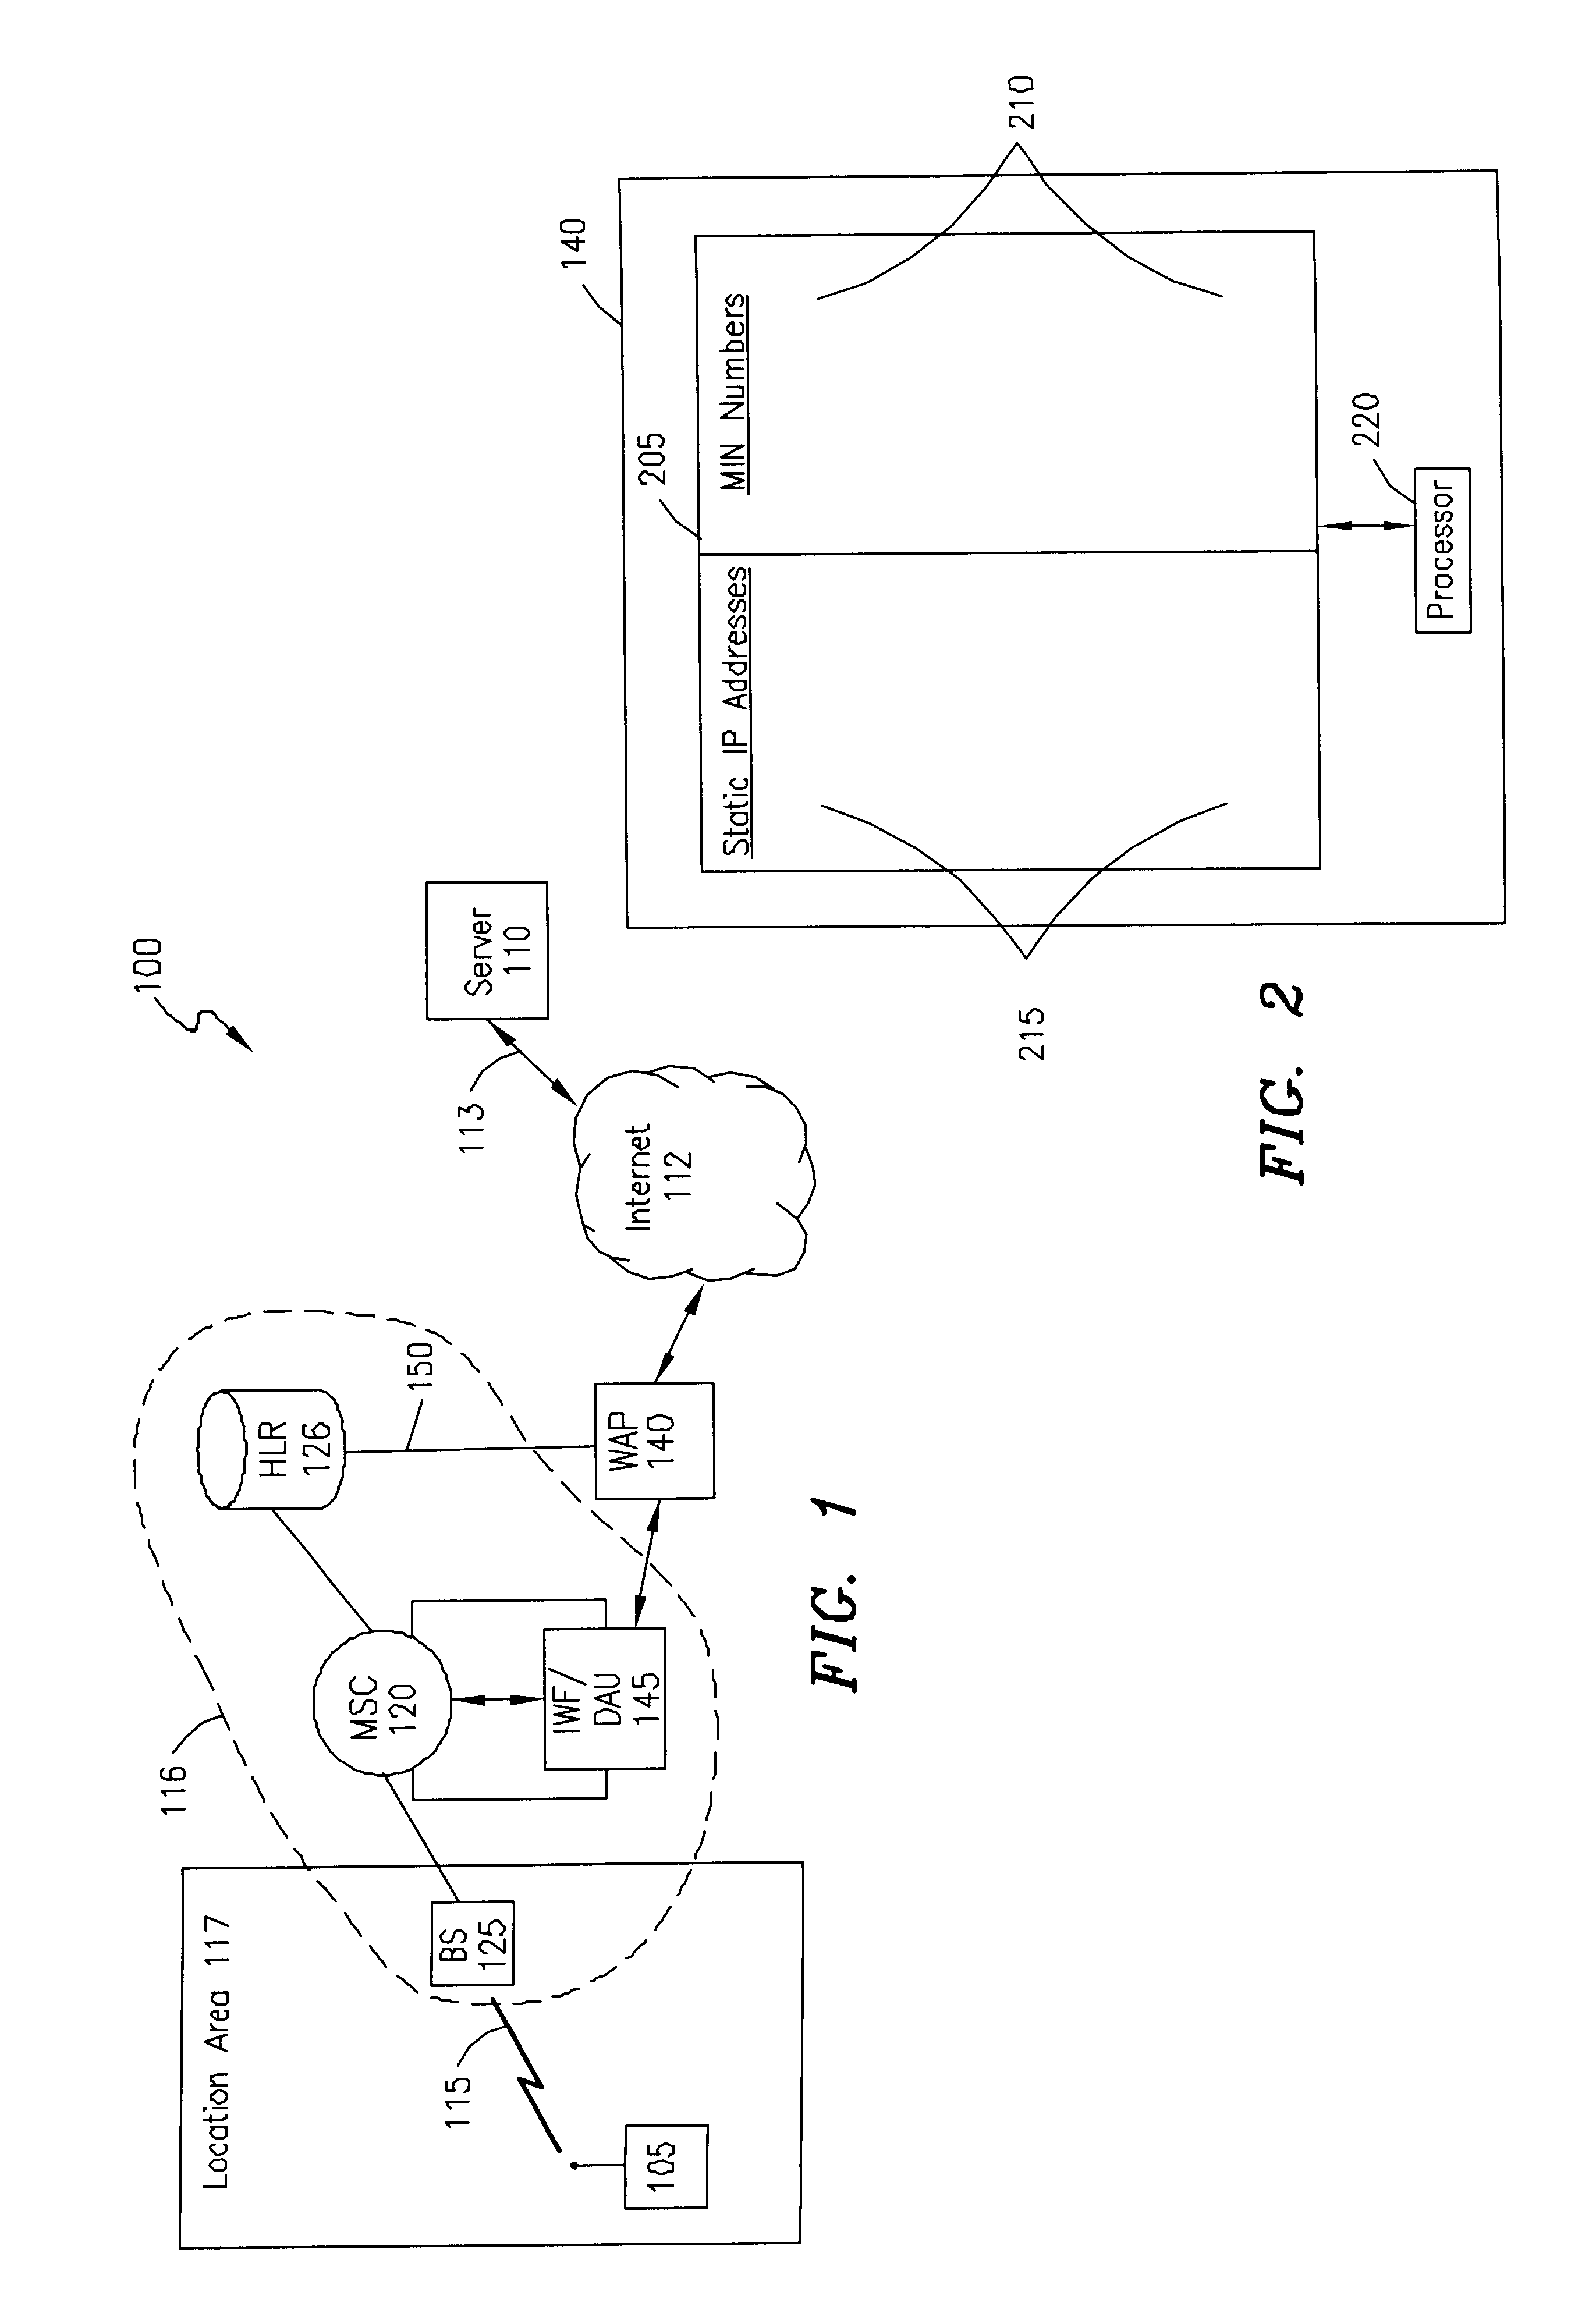 System, method, and apparatus for pushing data in a direct digital call environment